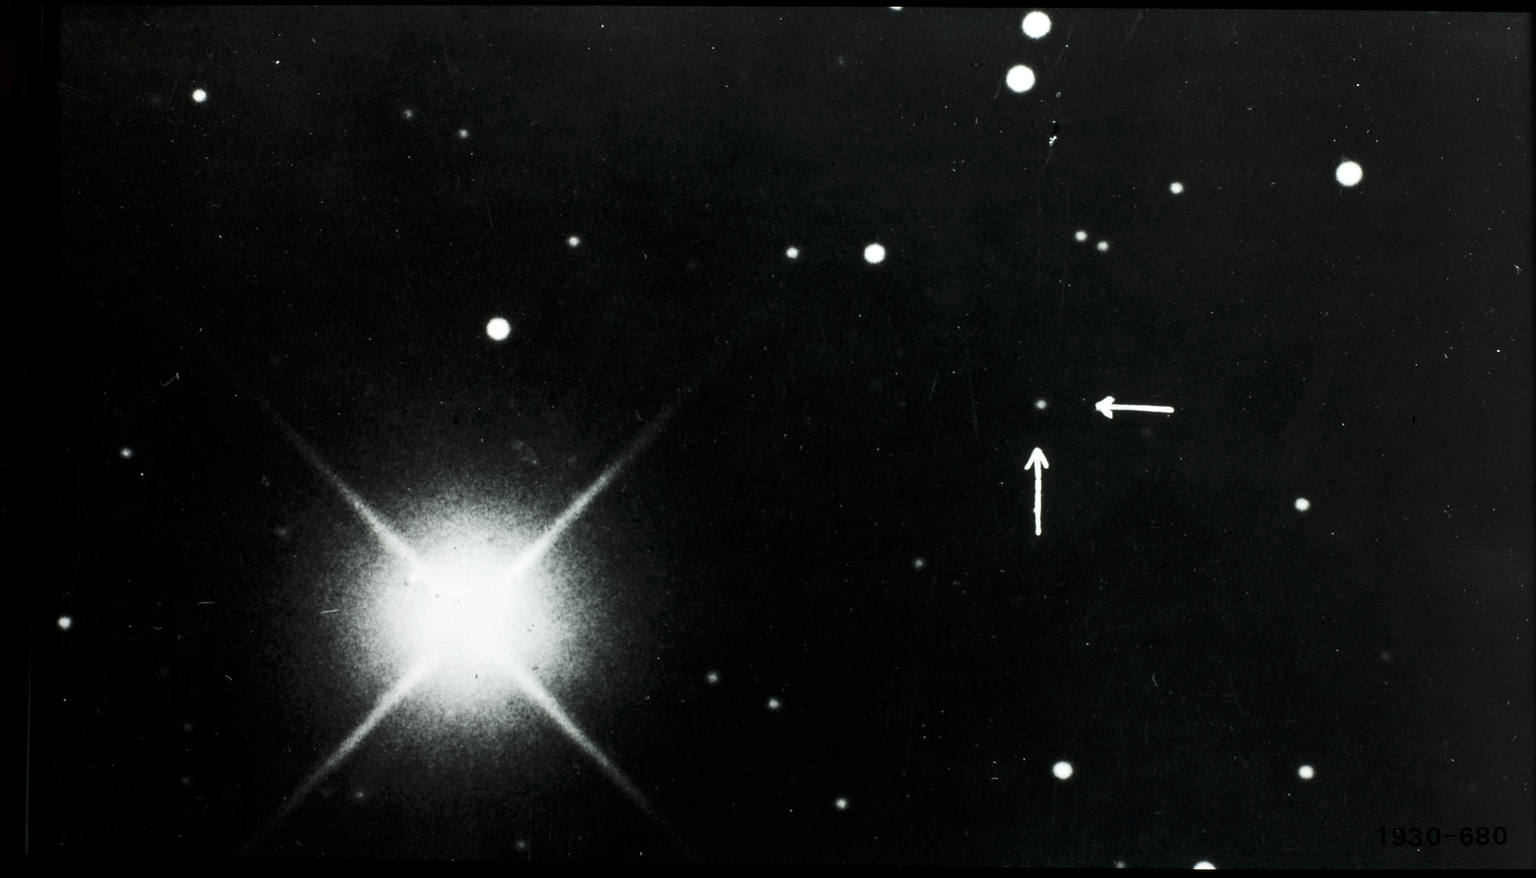 This Lowell Observatory photograph announcing the discovery shows Pluto marked with arrows. Credit © SCM / Science & Society Picture Library